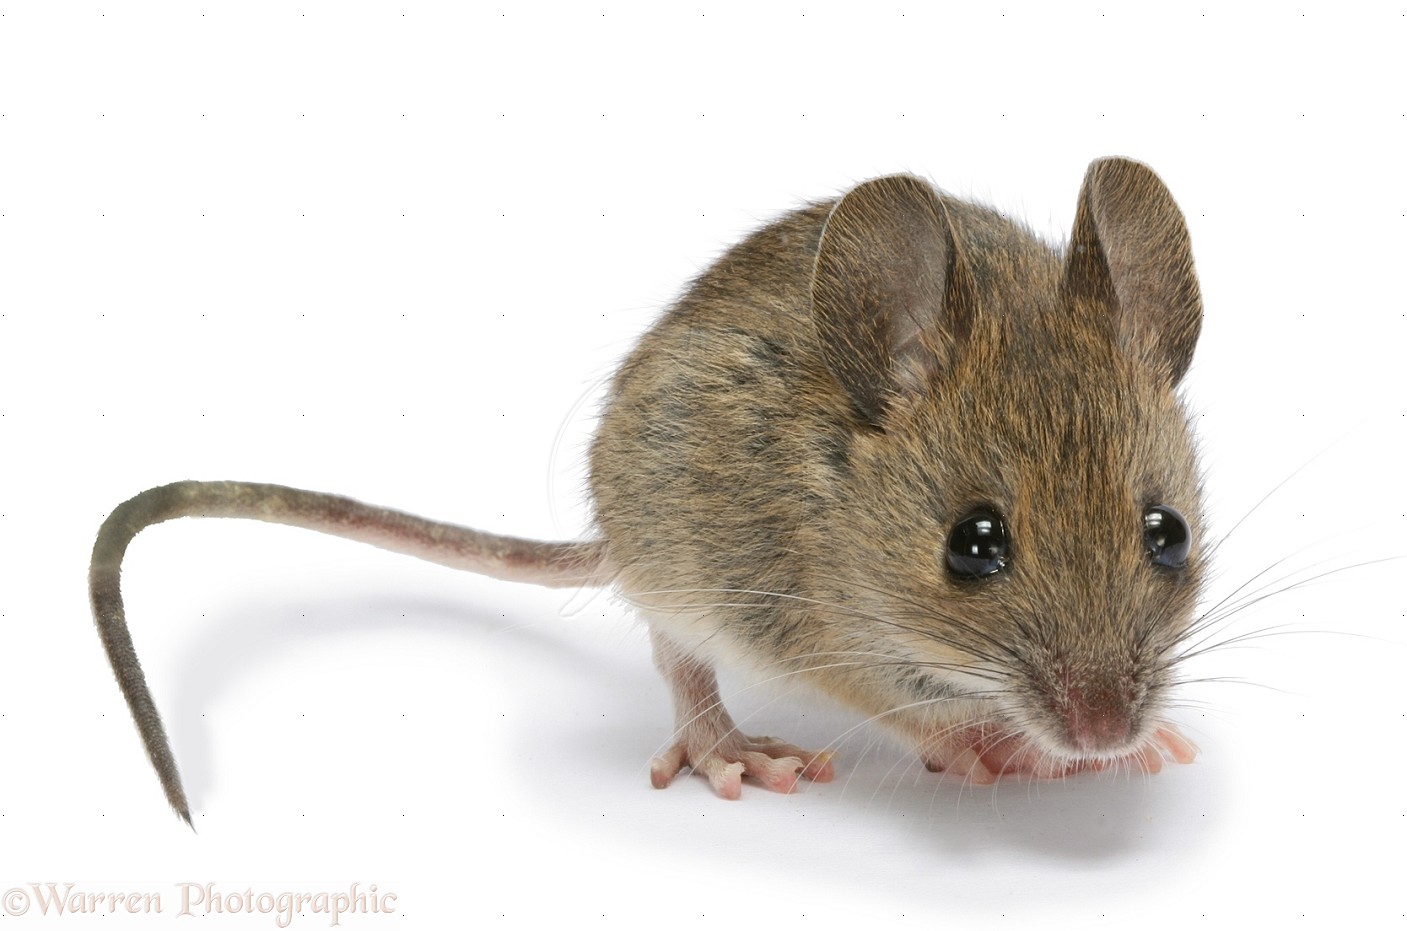 There is an unaired Mythbusters episode. Groups of mice were used to test if “the box is more nutritious than the cereal”. The mice in one of the groups were eating “pallets of cardboard”. One day they checked and there were no longer 3 mice in that group, but 1 really fat mouse.